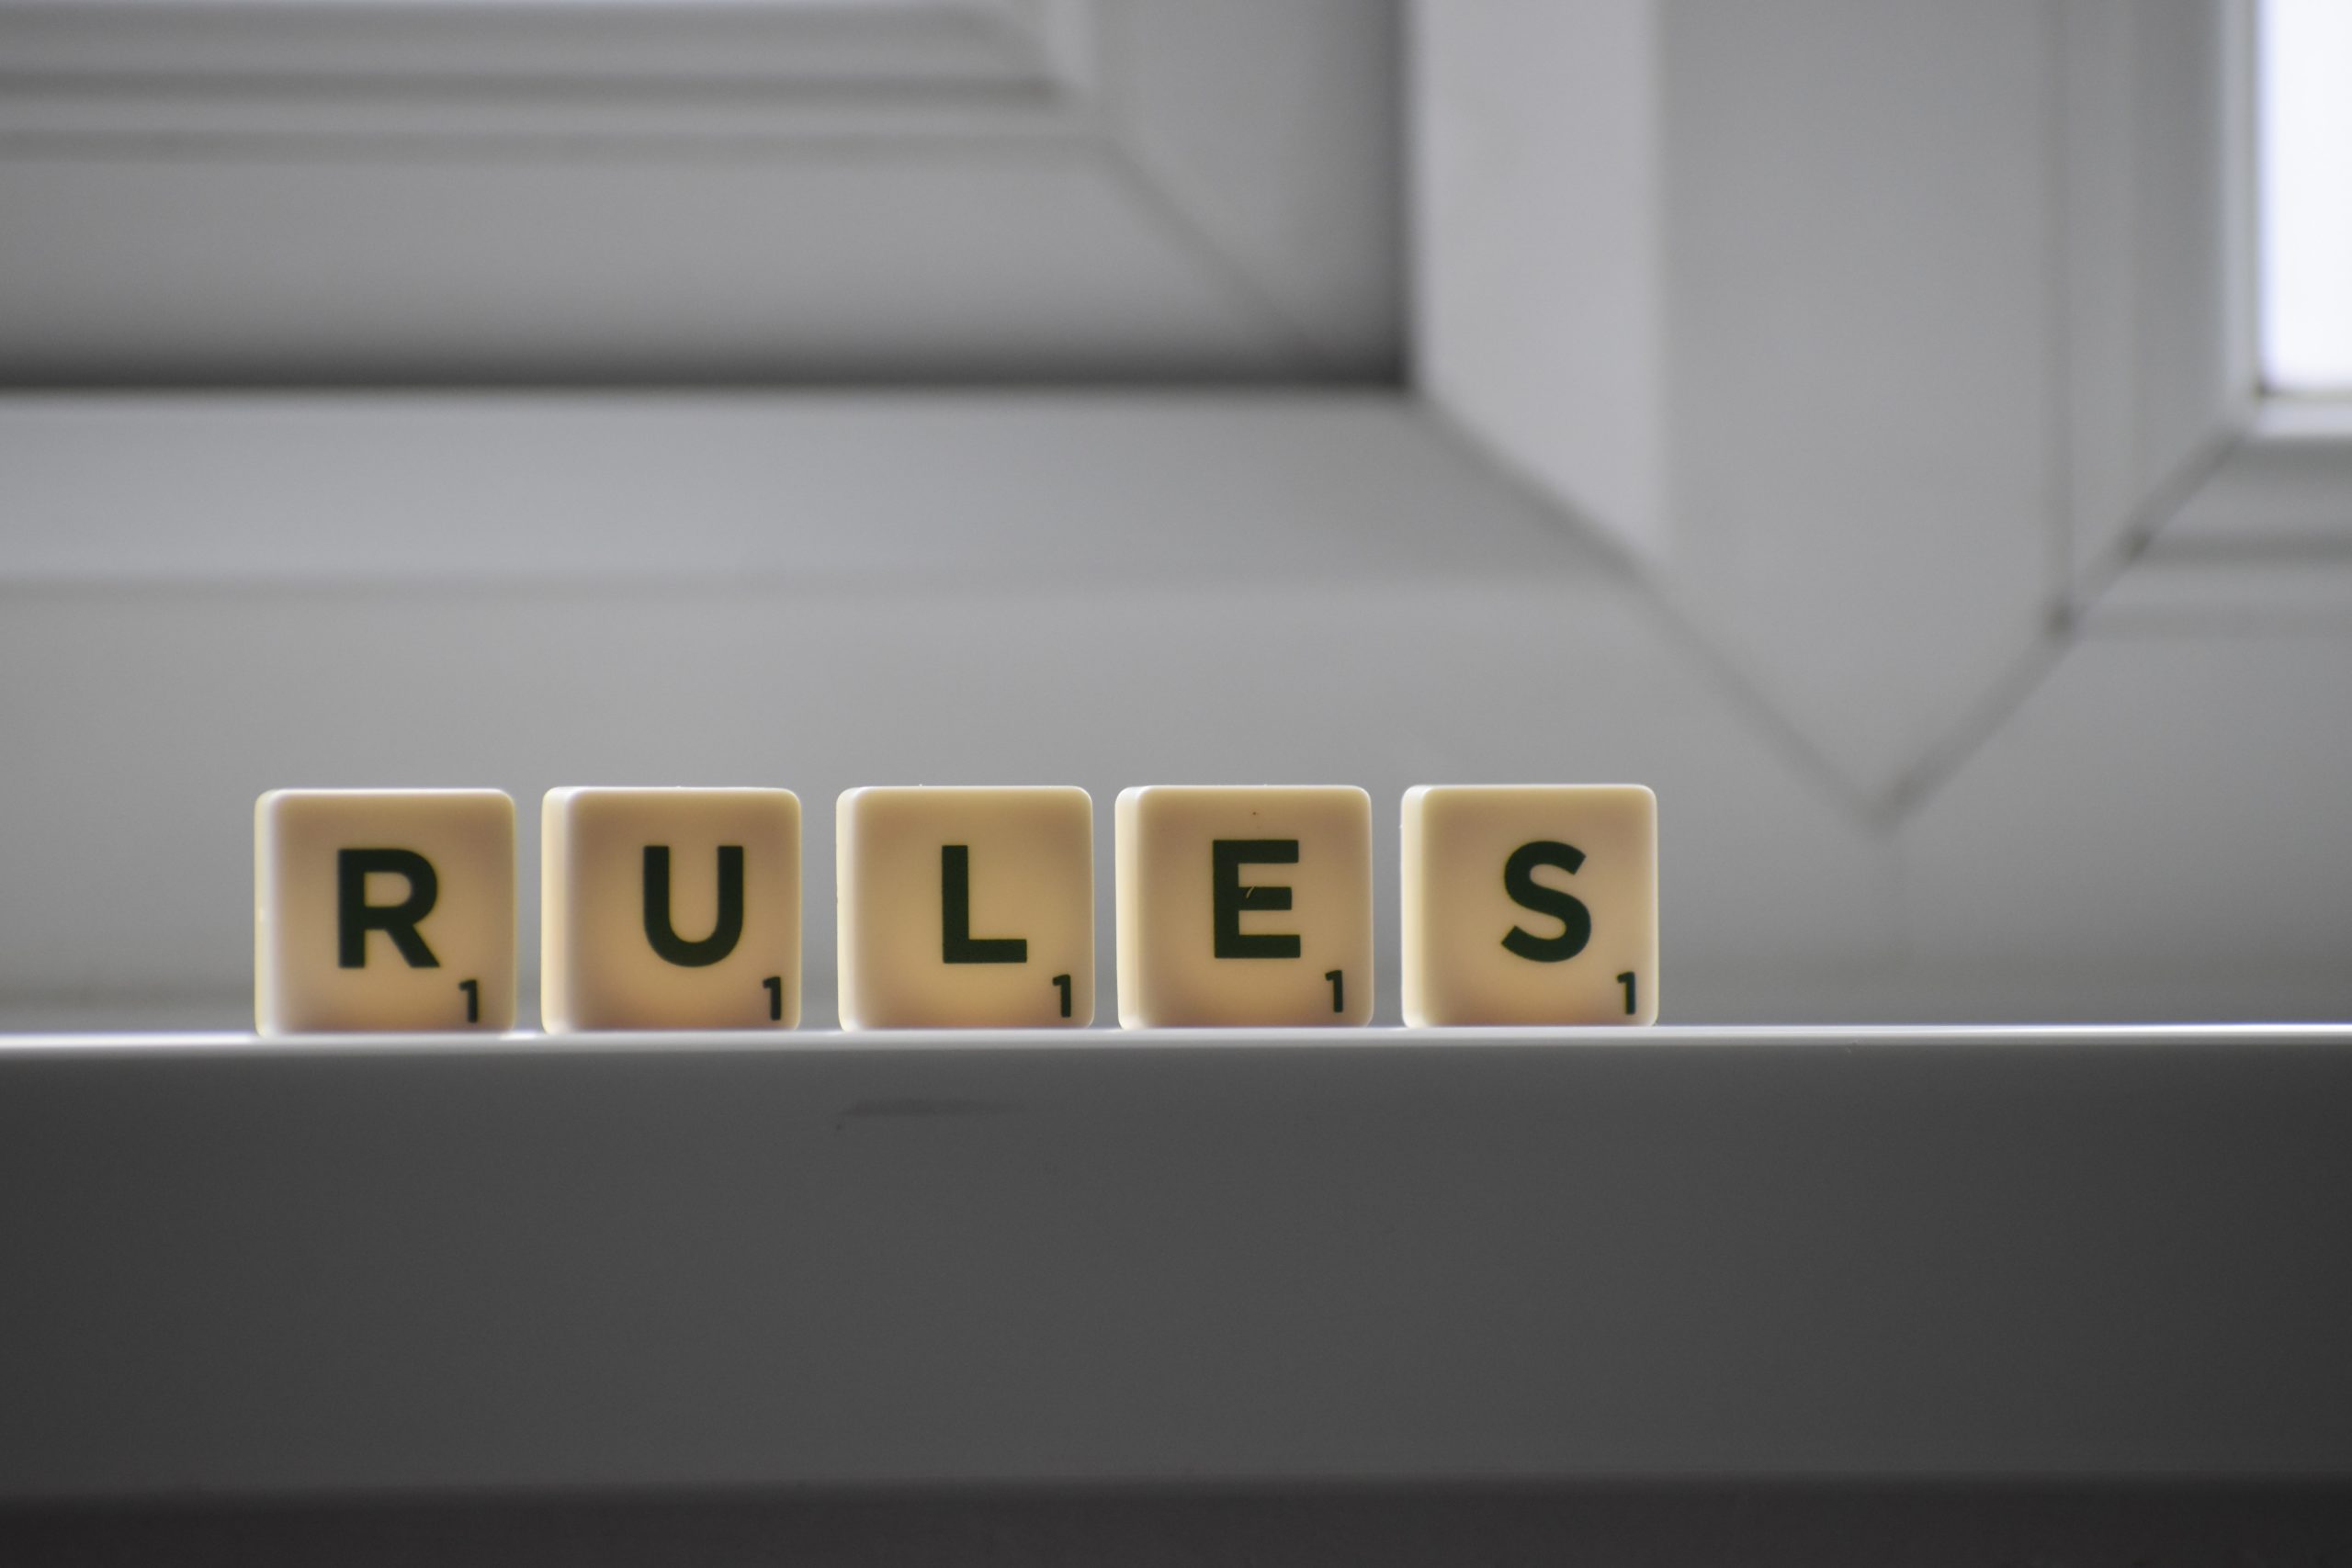 The word 'rules' spelled out in scrabble tiles on a windowsill.